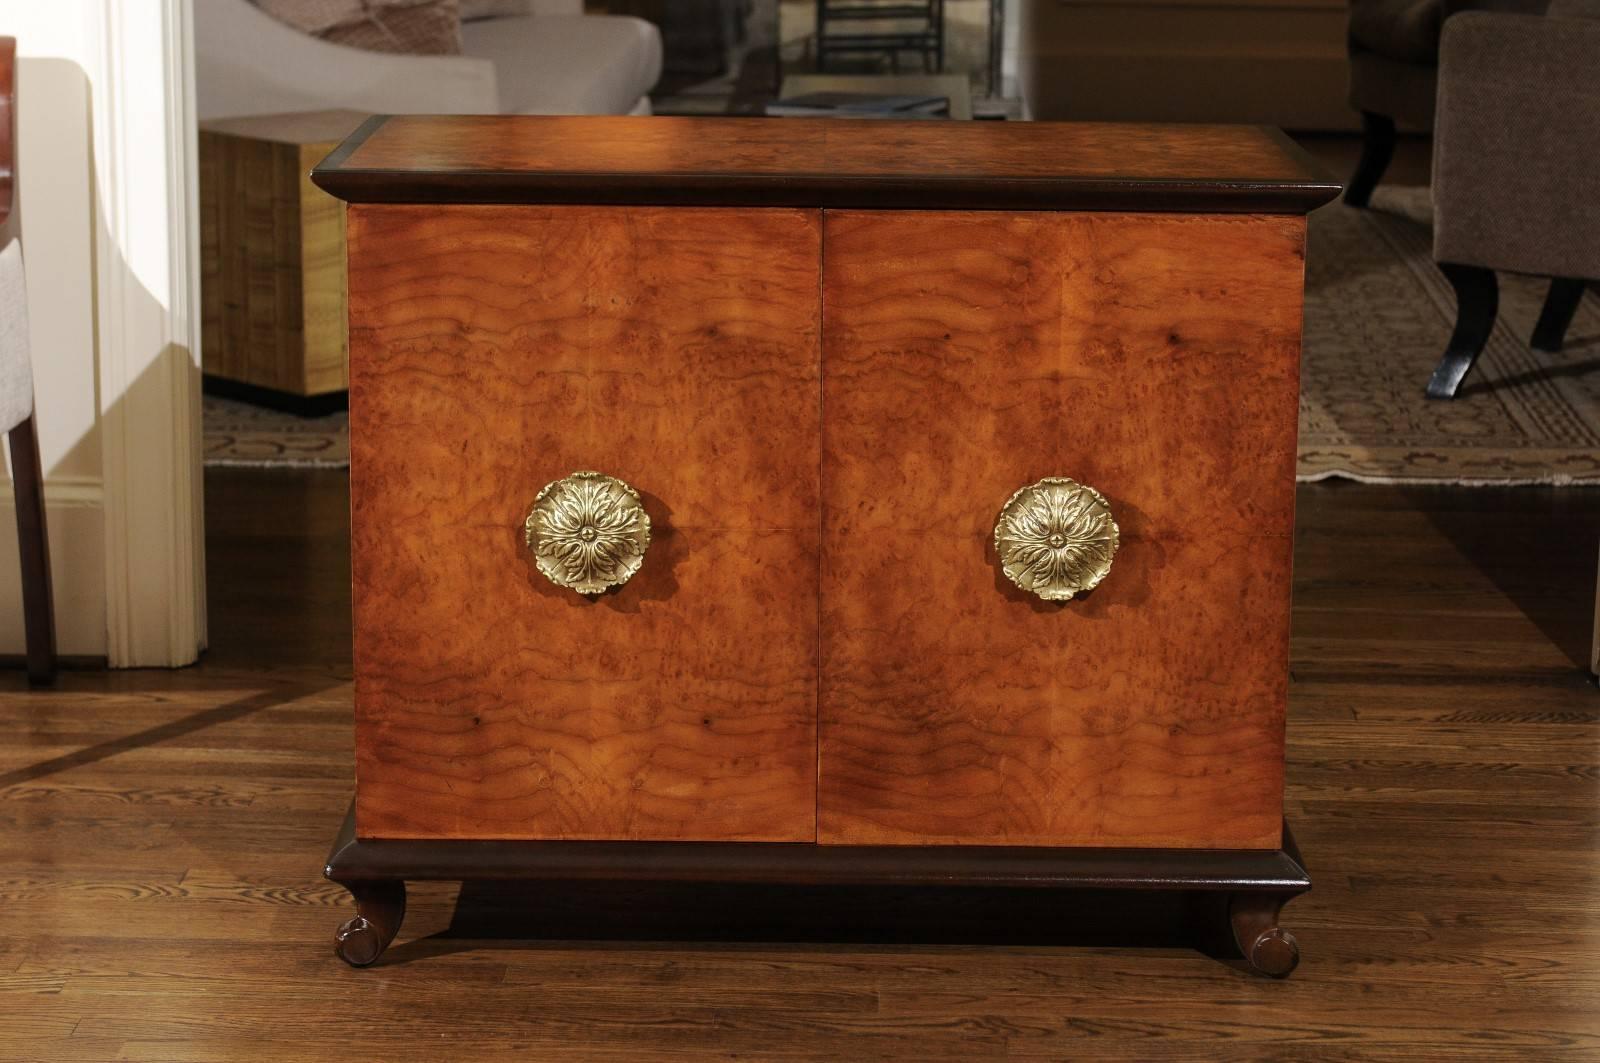 This magnificent chest is shipped as professionally photographed and described in the listing narrative: Meticulously professionally restored and completely installation ready.

A stunning cabinet by John Stuart, circa 1940. Expertly crafted